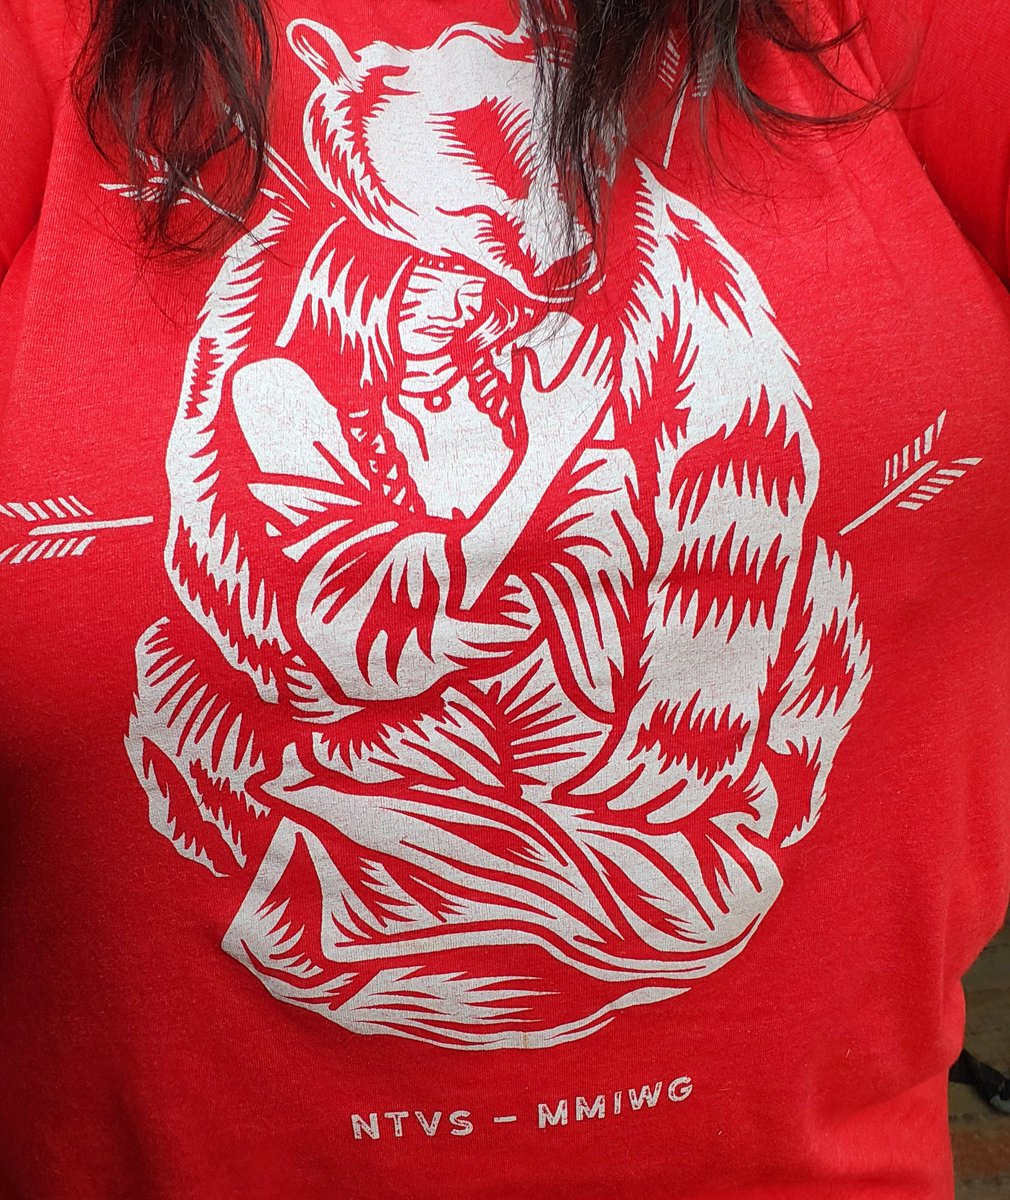 We wear red today in honor of #MMIW #mmiwg2s This bear represents a protective masculine energy. The man vs bear decision is not about all men, but about threat perception as some men we've trusted have hurt us badly, so we are even more afraid of those we don't #NativeTwitter